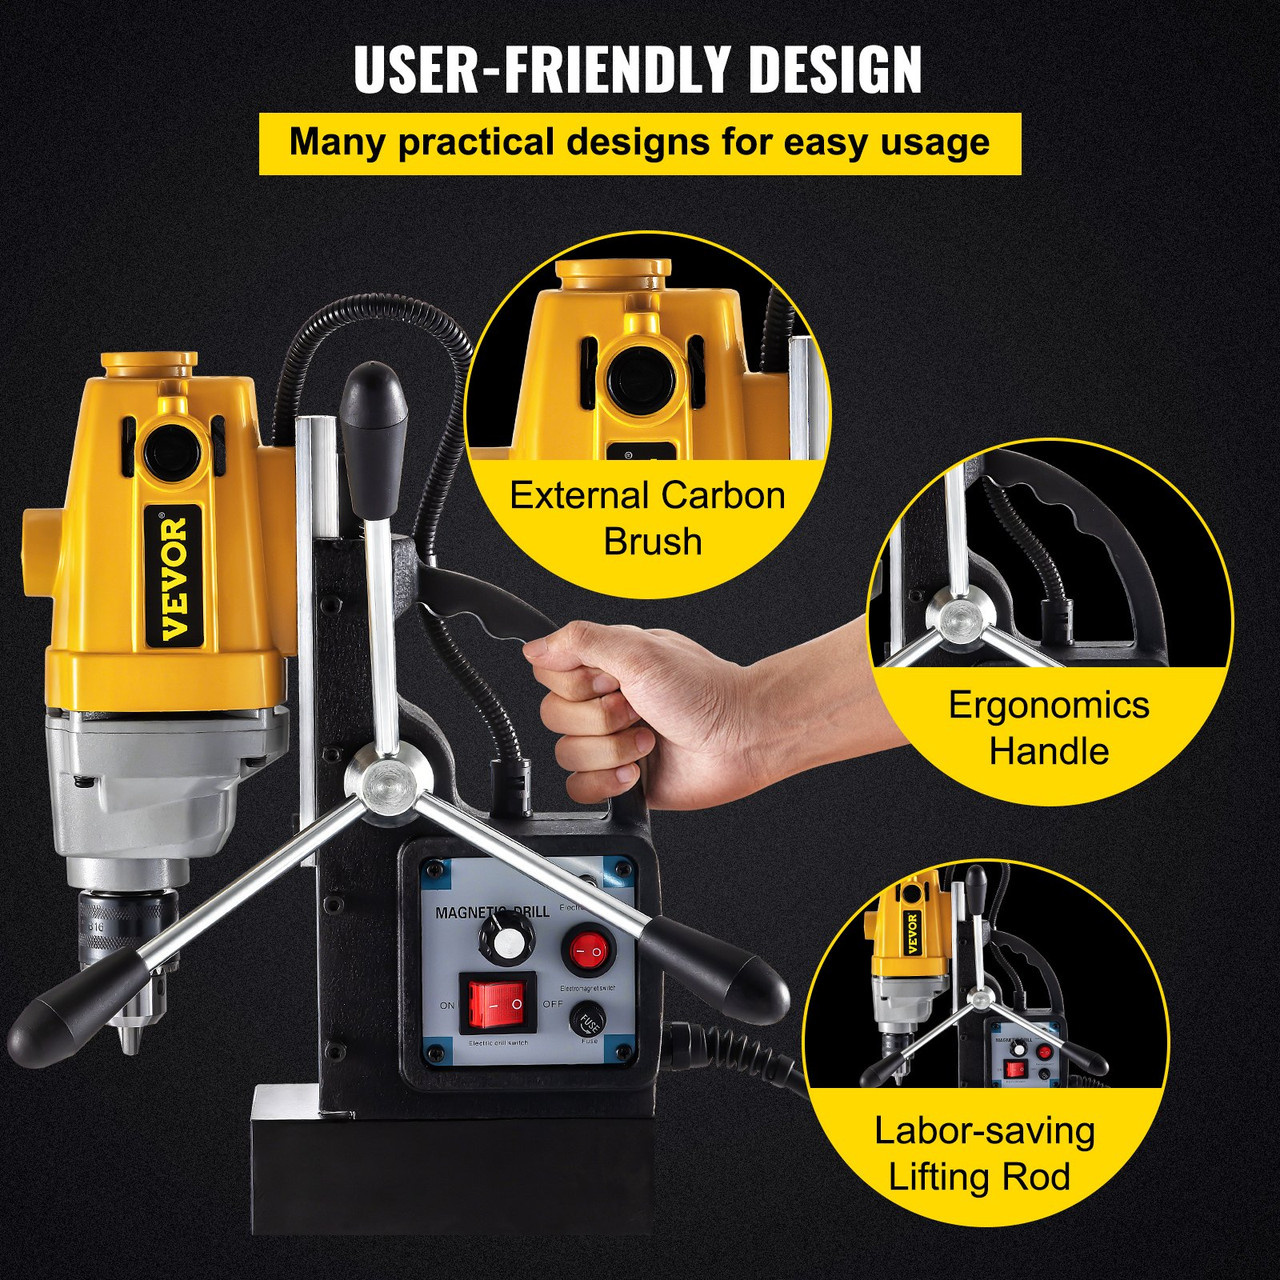 Mag Drill, 0-550 RPM Stepless Speed Electromagnetic Drill Press, 3.9" Depth 0.5" Dia Magnetic Core Drill, 1910lbf Boring Tool Drill Press, 750W Drill Press, Yellow and Black Drill Machine